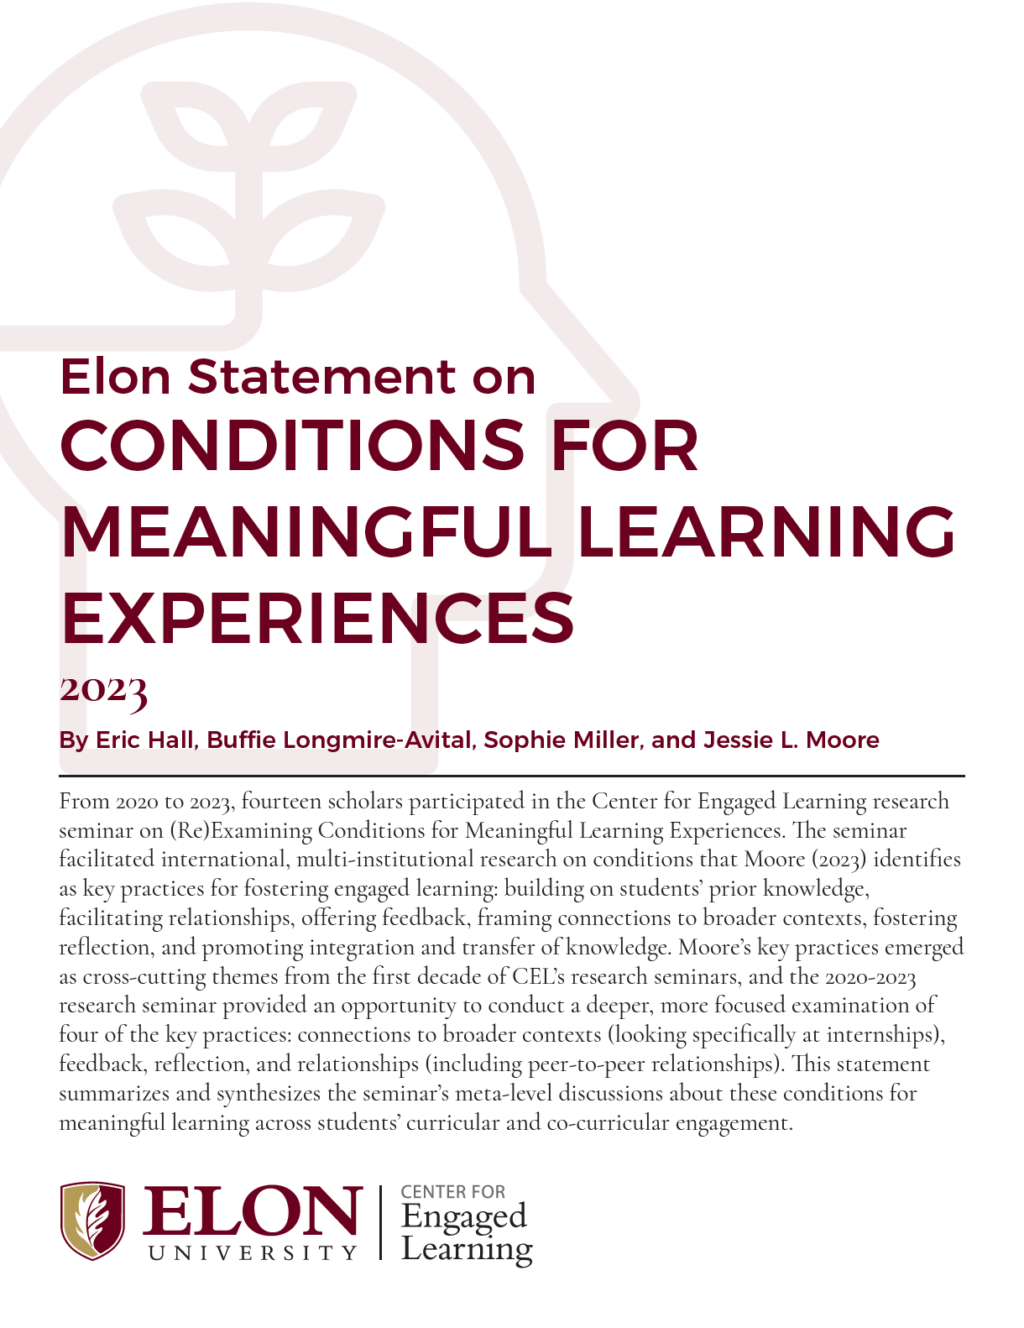 Cover page of the Elon Statement on Conditions for Meaningful Learning Experiences, showing an icon of a plant growing within a head